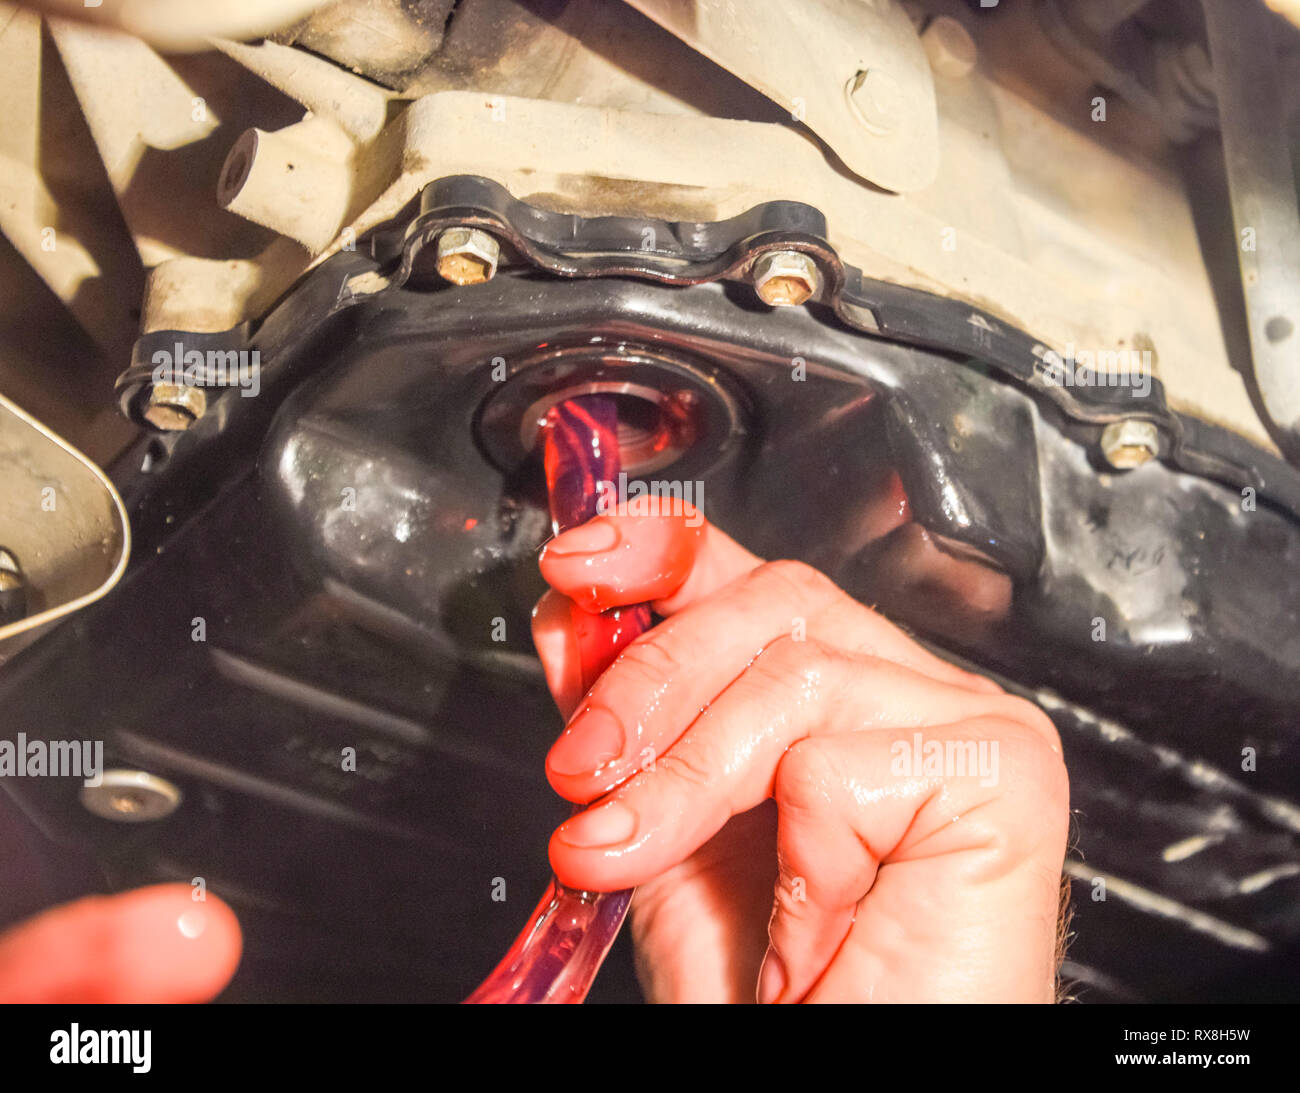 Oil change in automatic transmission. Filling the oil through the hose. Car maintenance station. Red gear oil. The hands of the car mechanic in oil. Stock Photo